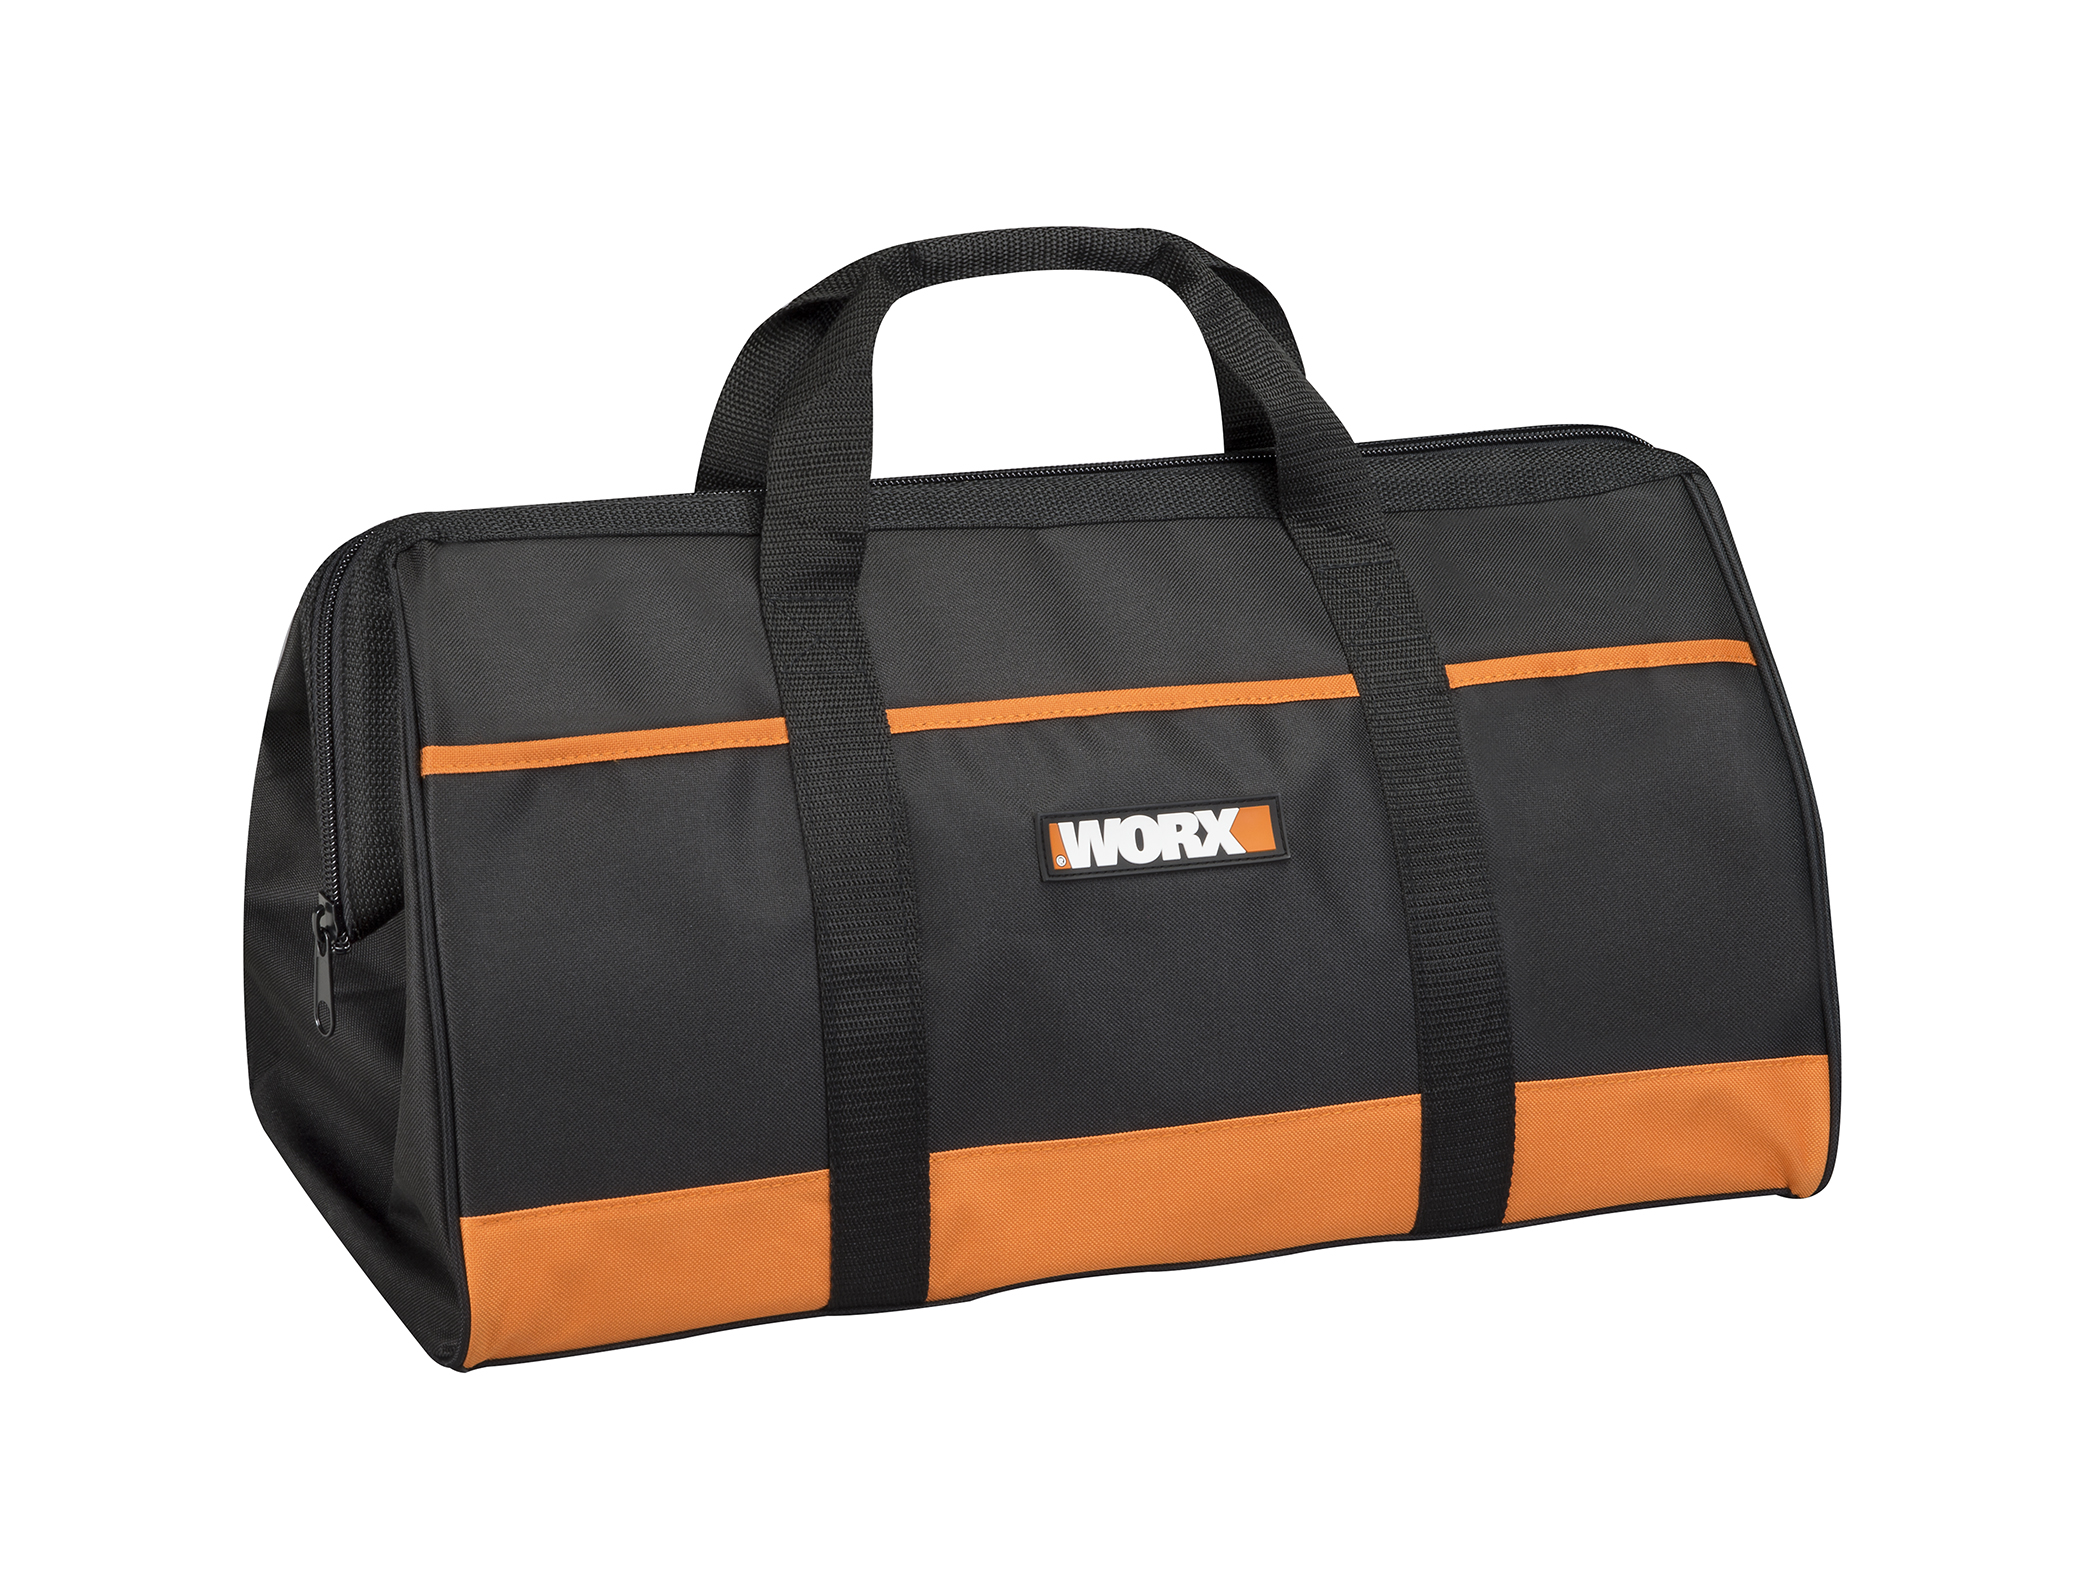 WORX Large Zippered Tool Tote with Interior and Exterior Pockets is made of heavy-duty nylon with a zippered closure.